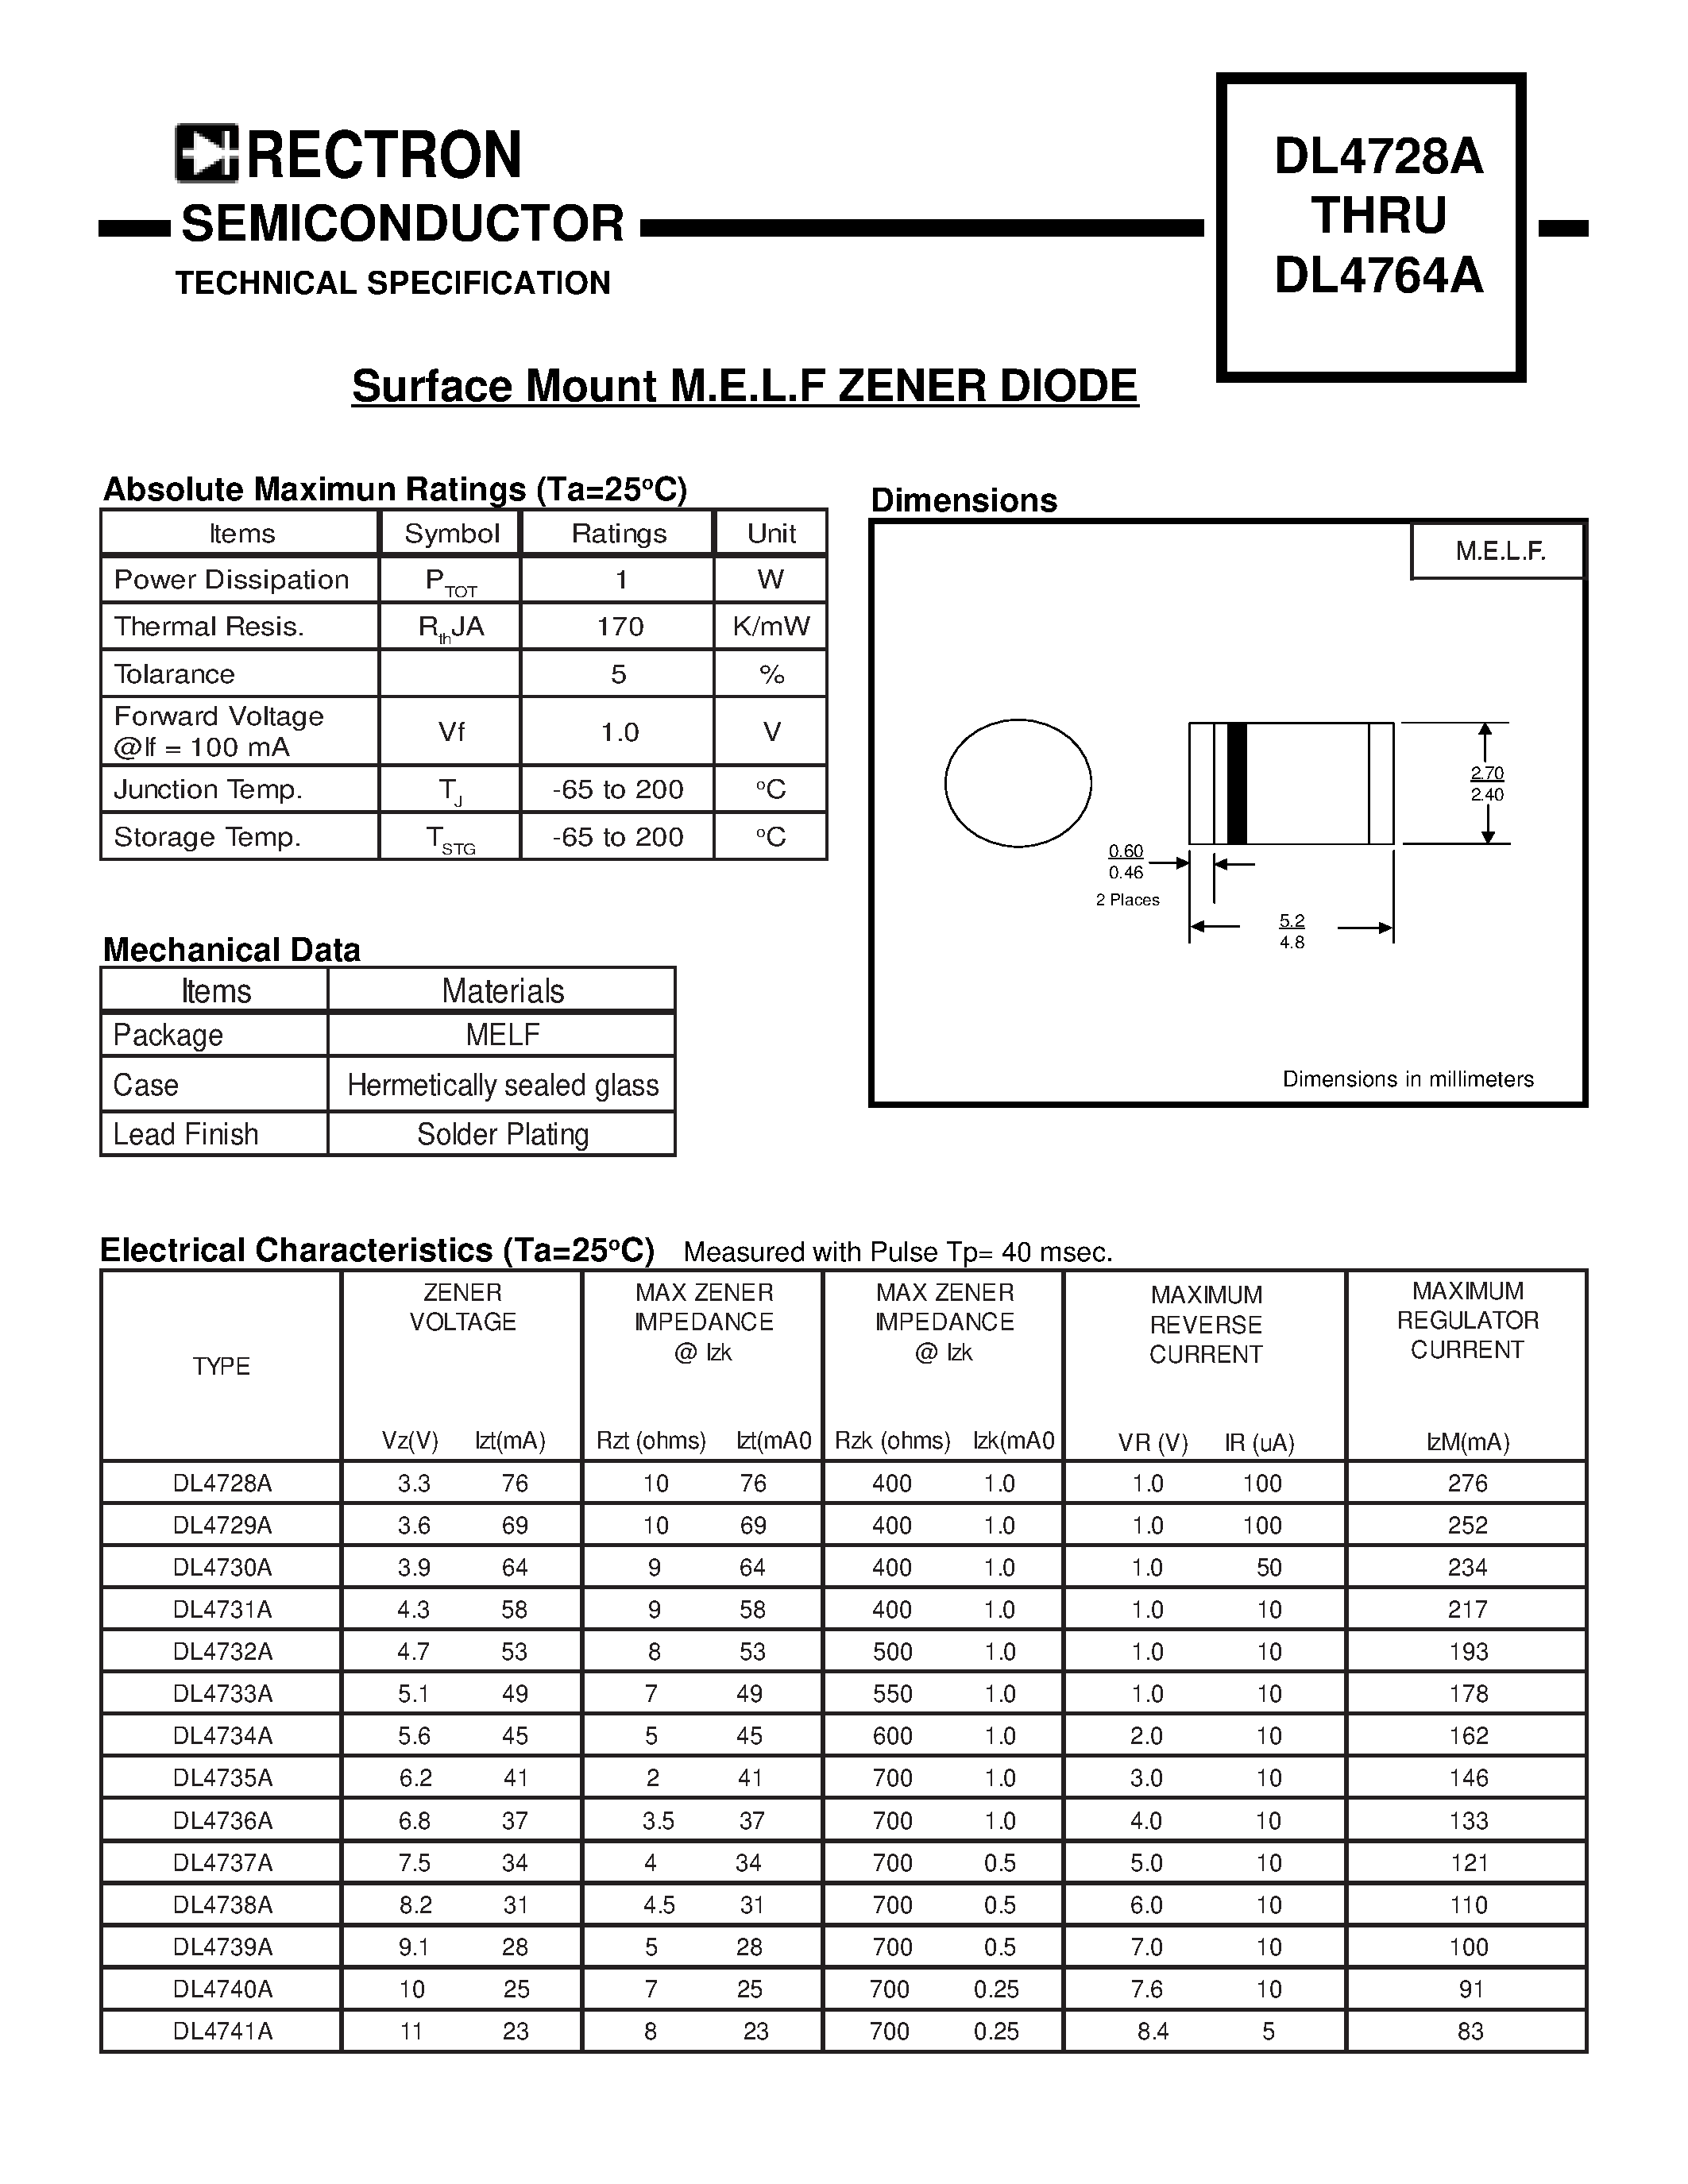 Datasheet DL4764A - Surface Mount M.E.L.F ZENER DIODE page 1